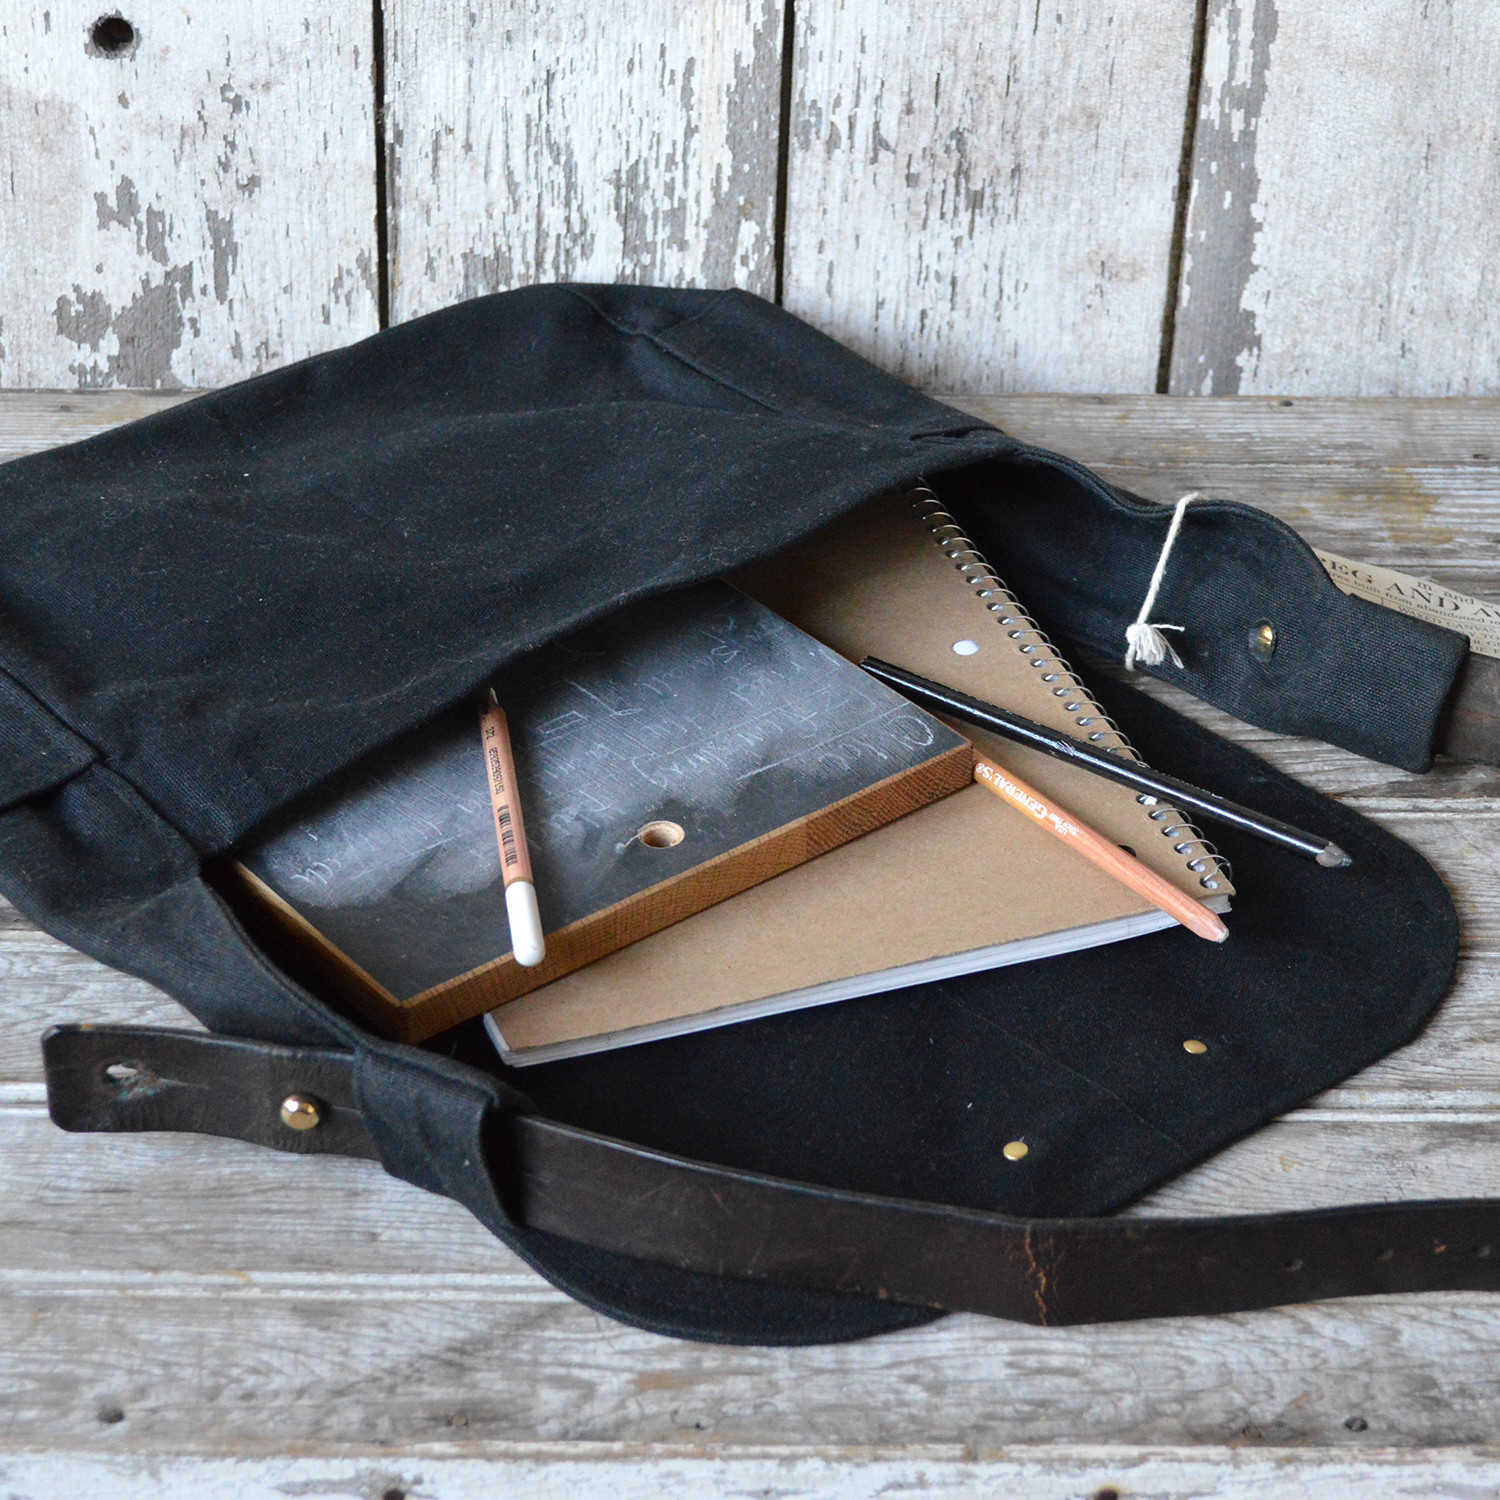 The Calhoun Leather Satchel - LM Products - Touch of Modern